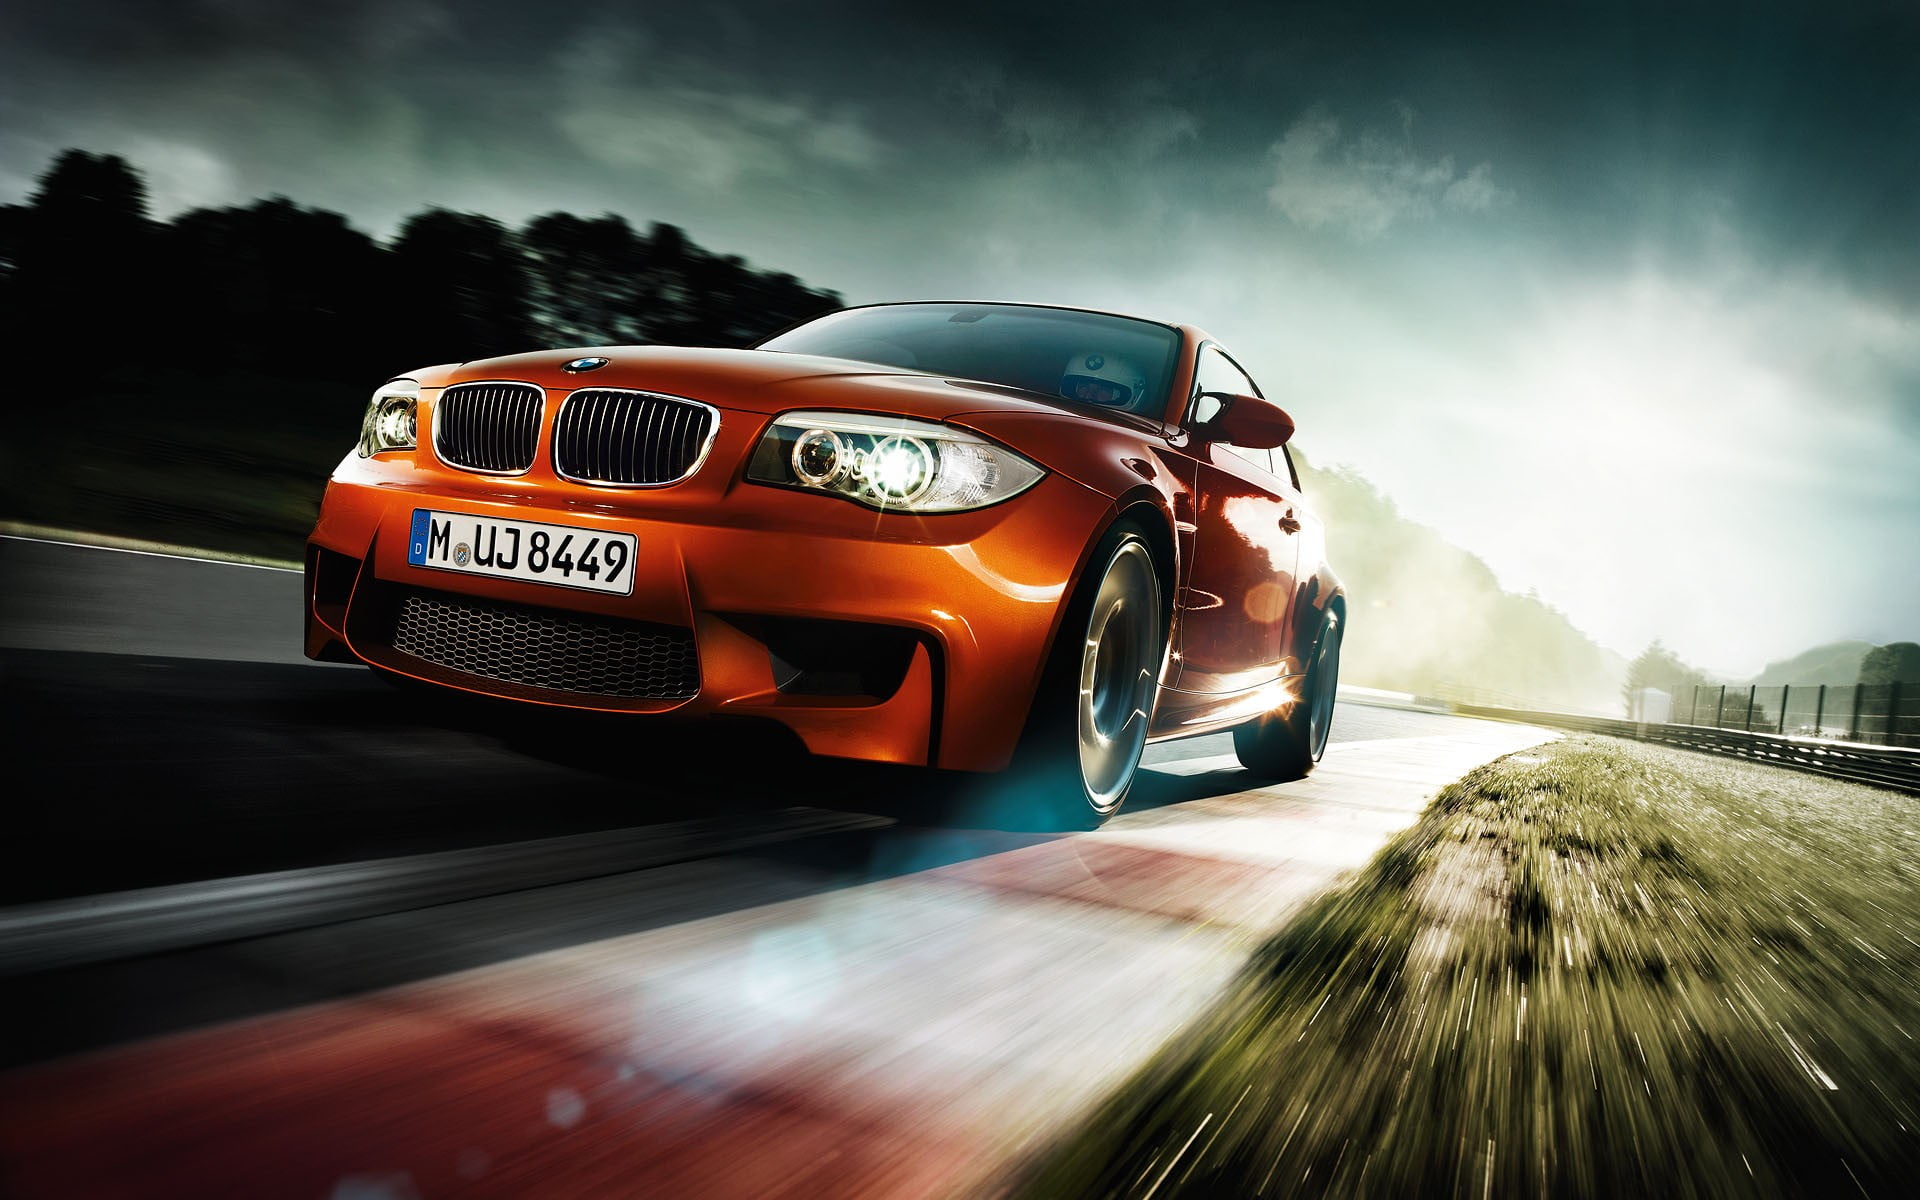 BMW 1 Series M Coupe Test, orange BMW coupe, Cars, mode of transportation